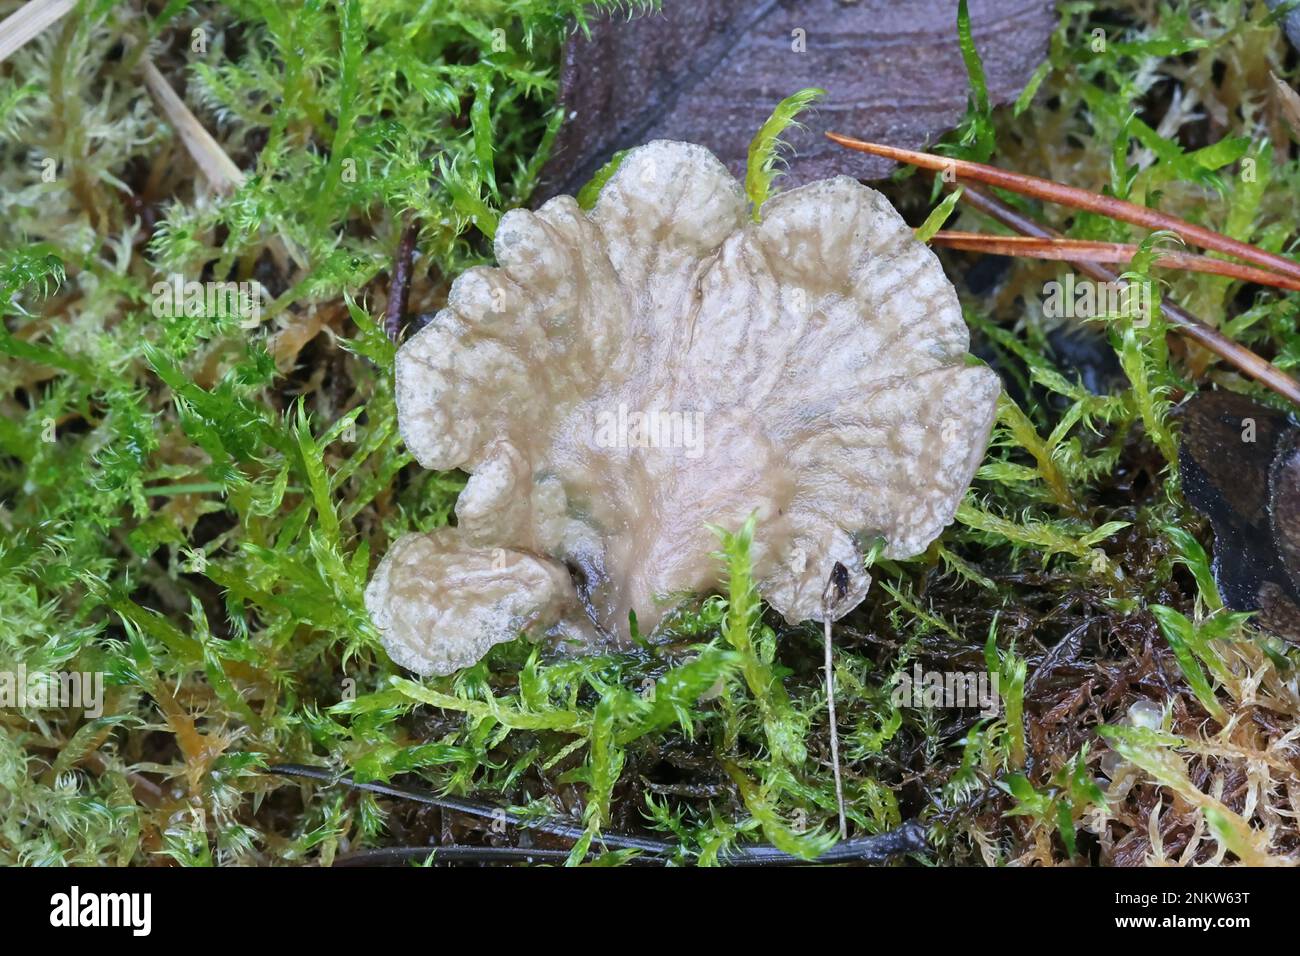 Arrhenia lobata, commonly known as lobed oysterling, wild fungus from Finland Stock Photo